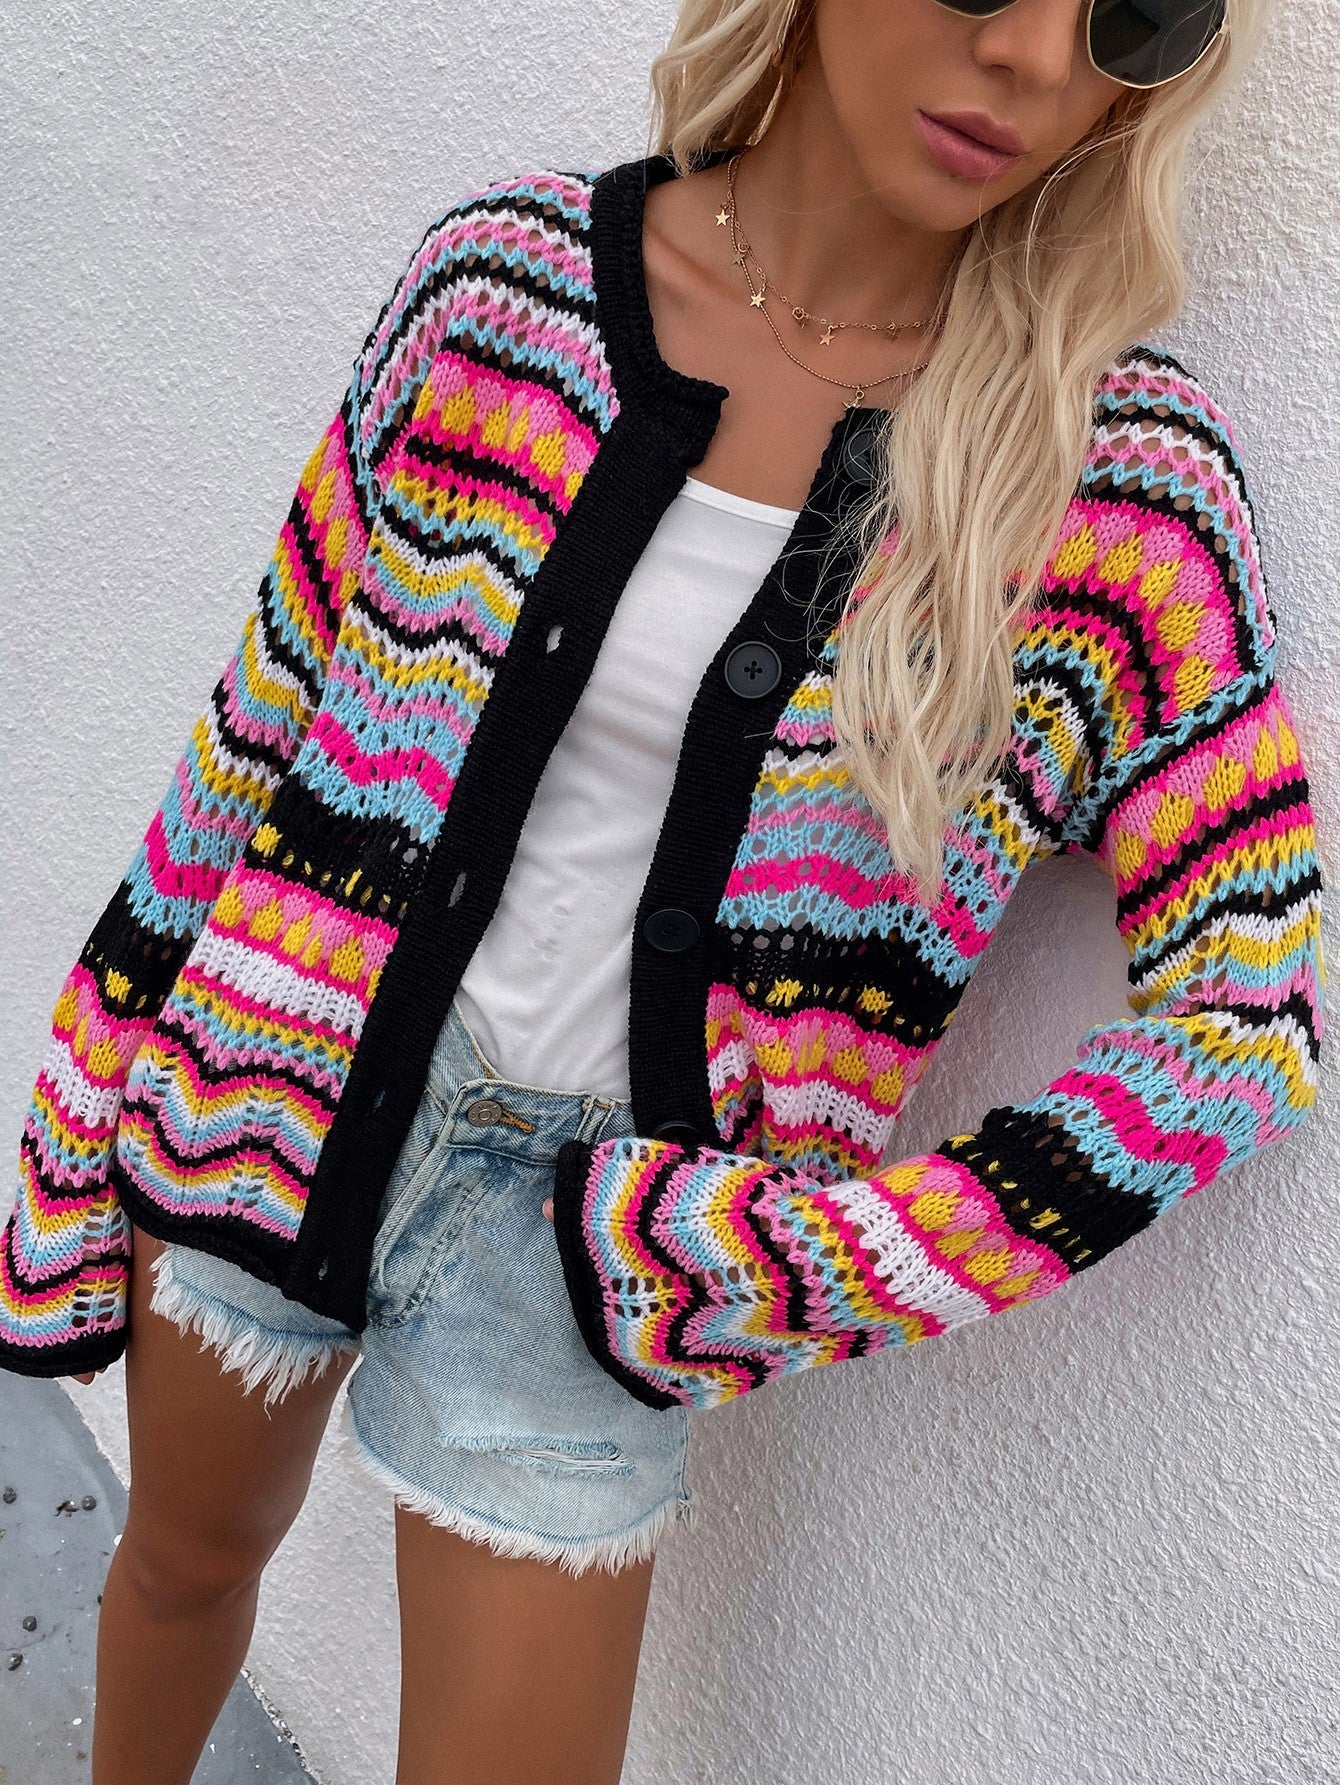 Cardigan - Buttom Up Knit - Multi-hotRAGS.com